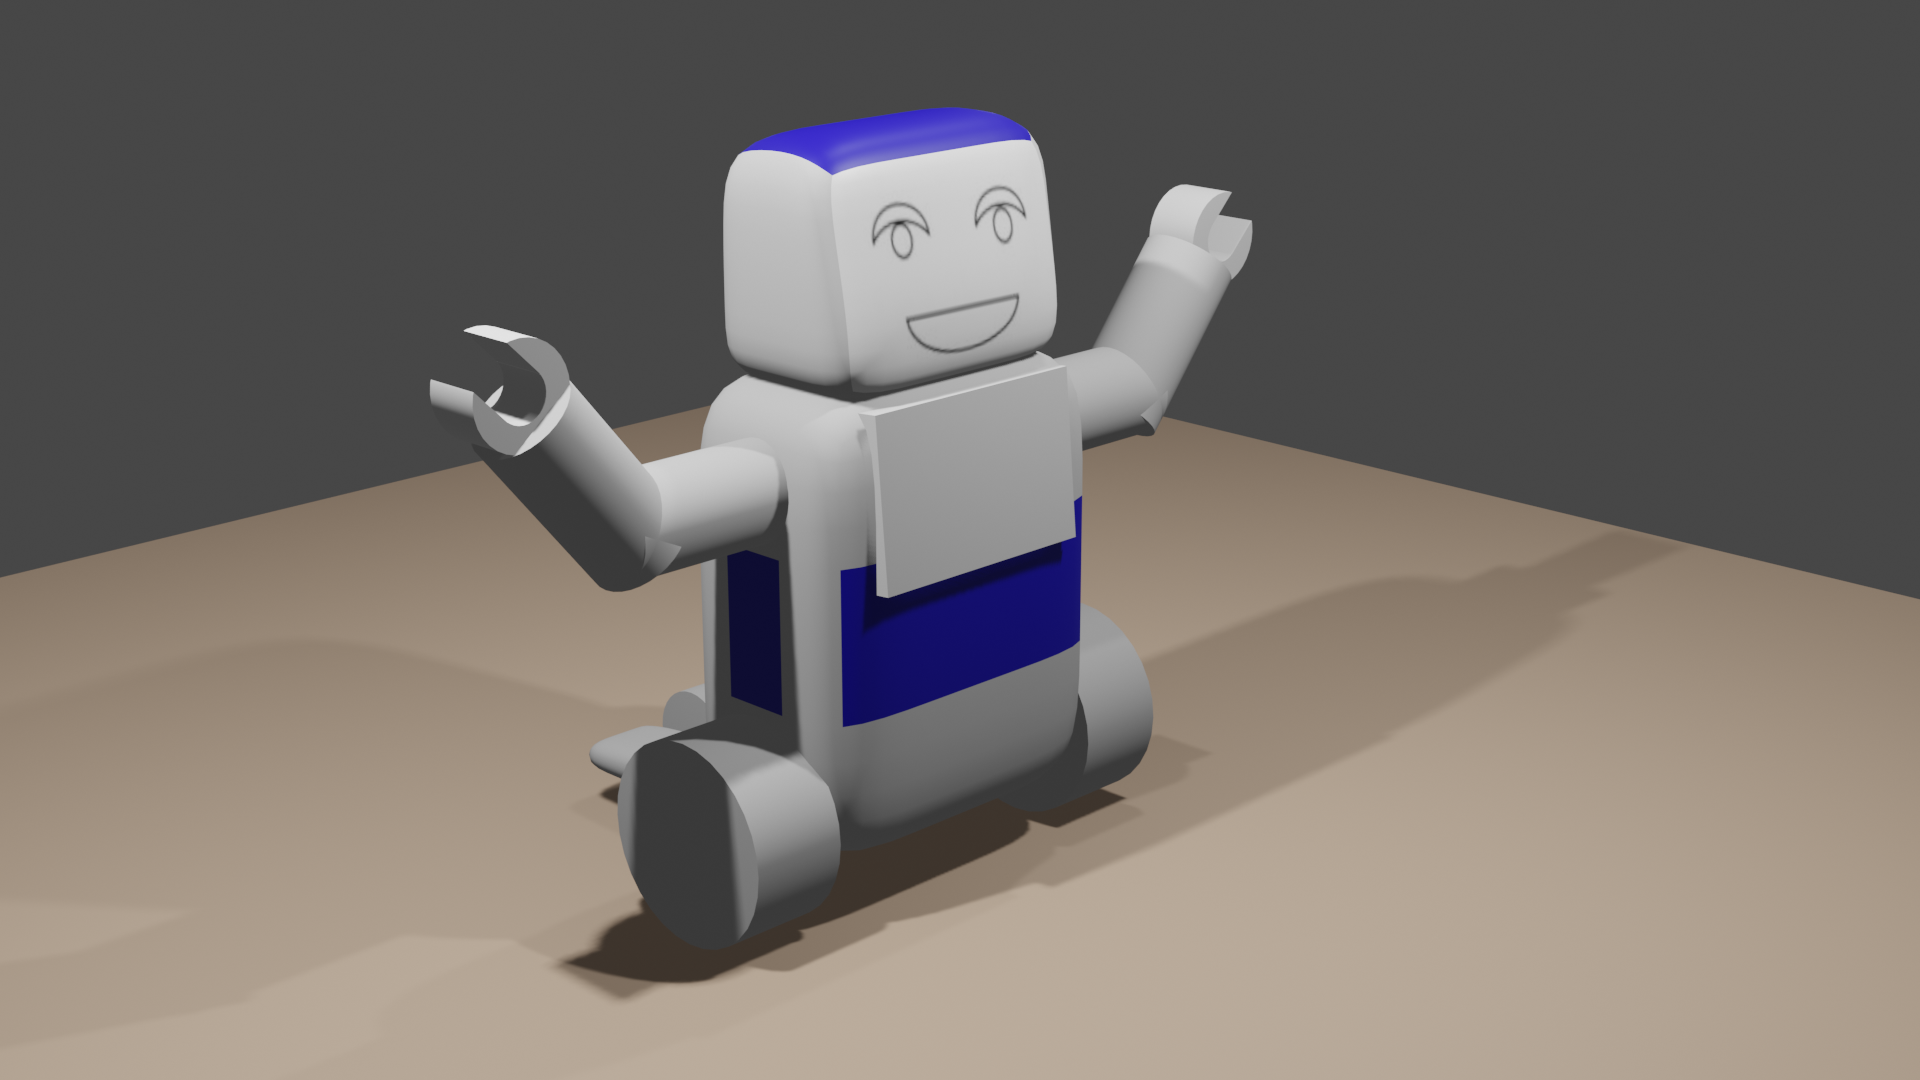 The robot design with wheels.